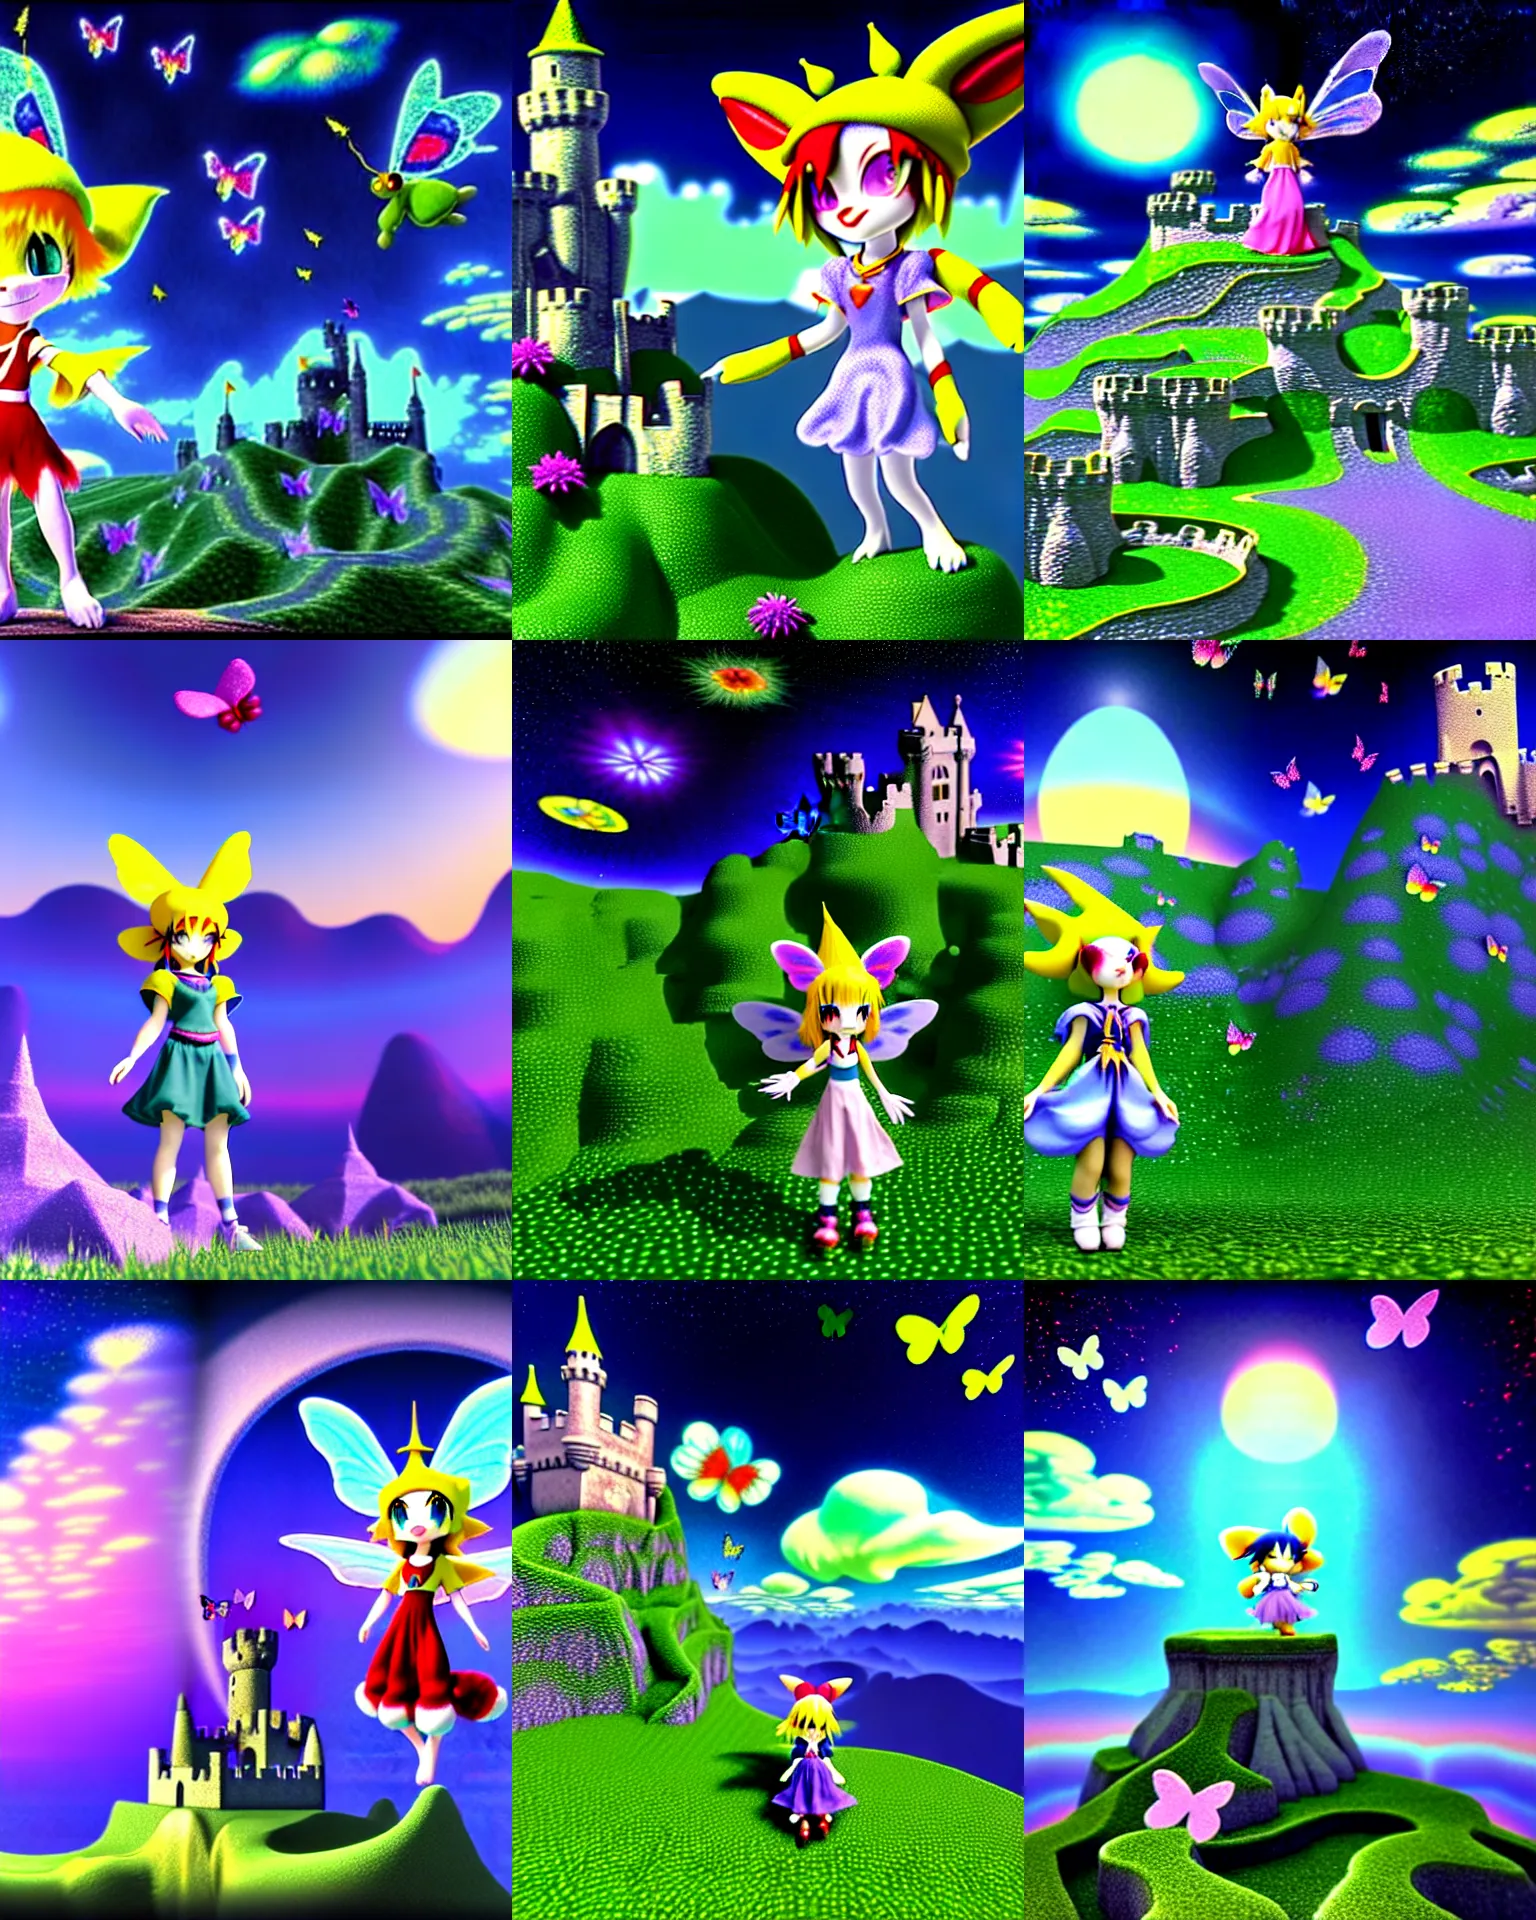 Prompt: 3 d render of chibi wizard klonoa fairy standing in raytraced mountain landscape with castle ruins against a psychedelic surreal background with 3 d butterflies and 3 d flowers n the style of 1 9 9 0's cg graphics against the cloudy night sky, lsd dream emulator psx, 3 d rendered y 2 k aesthetic by ichiro tanida, 3 do magazine, wide shot